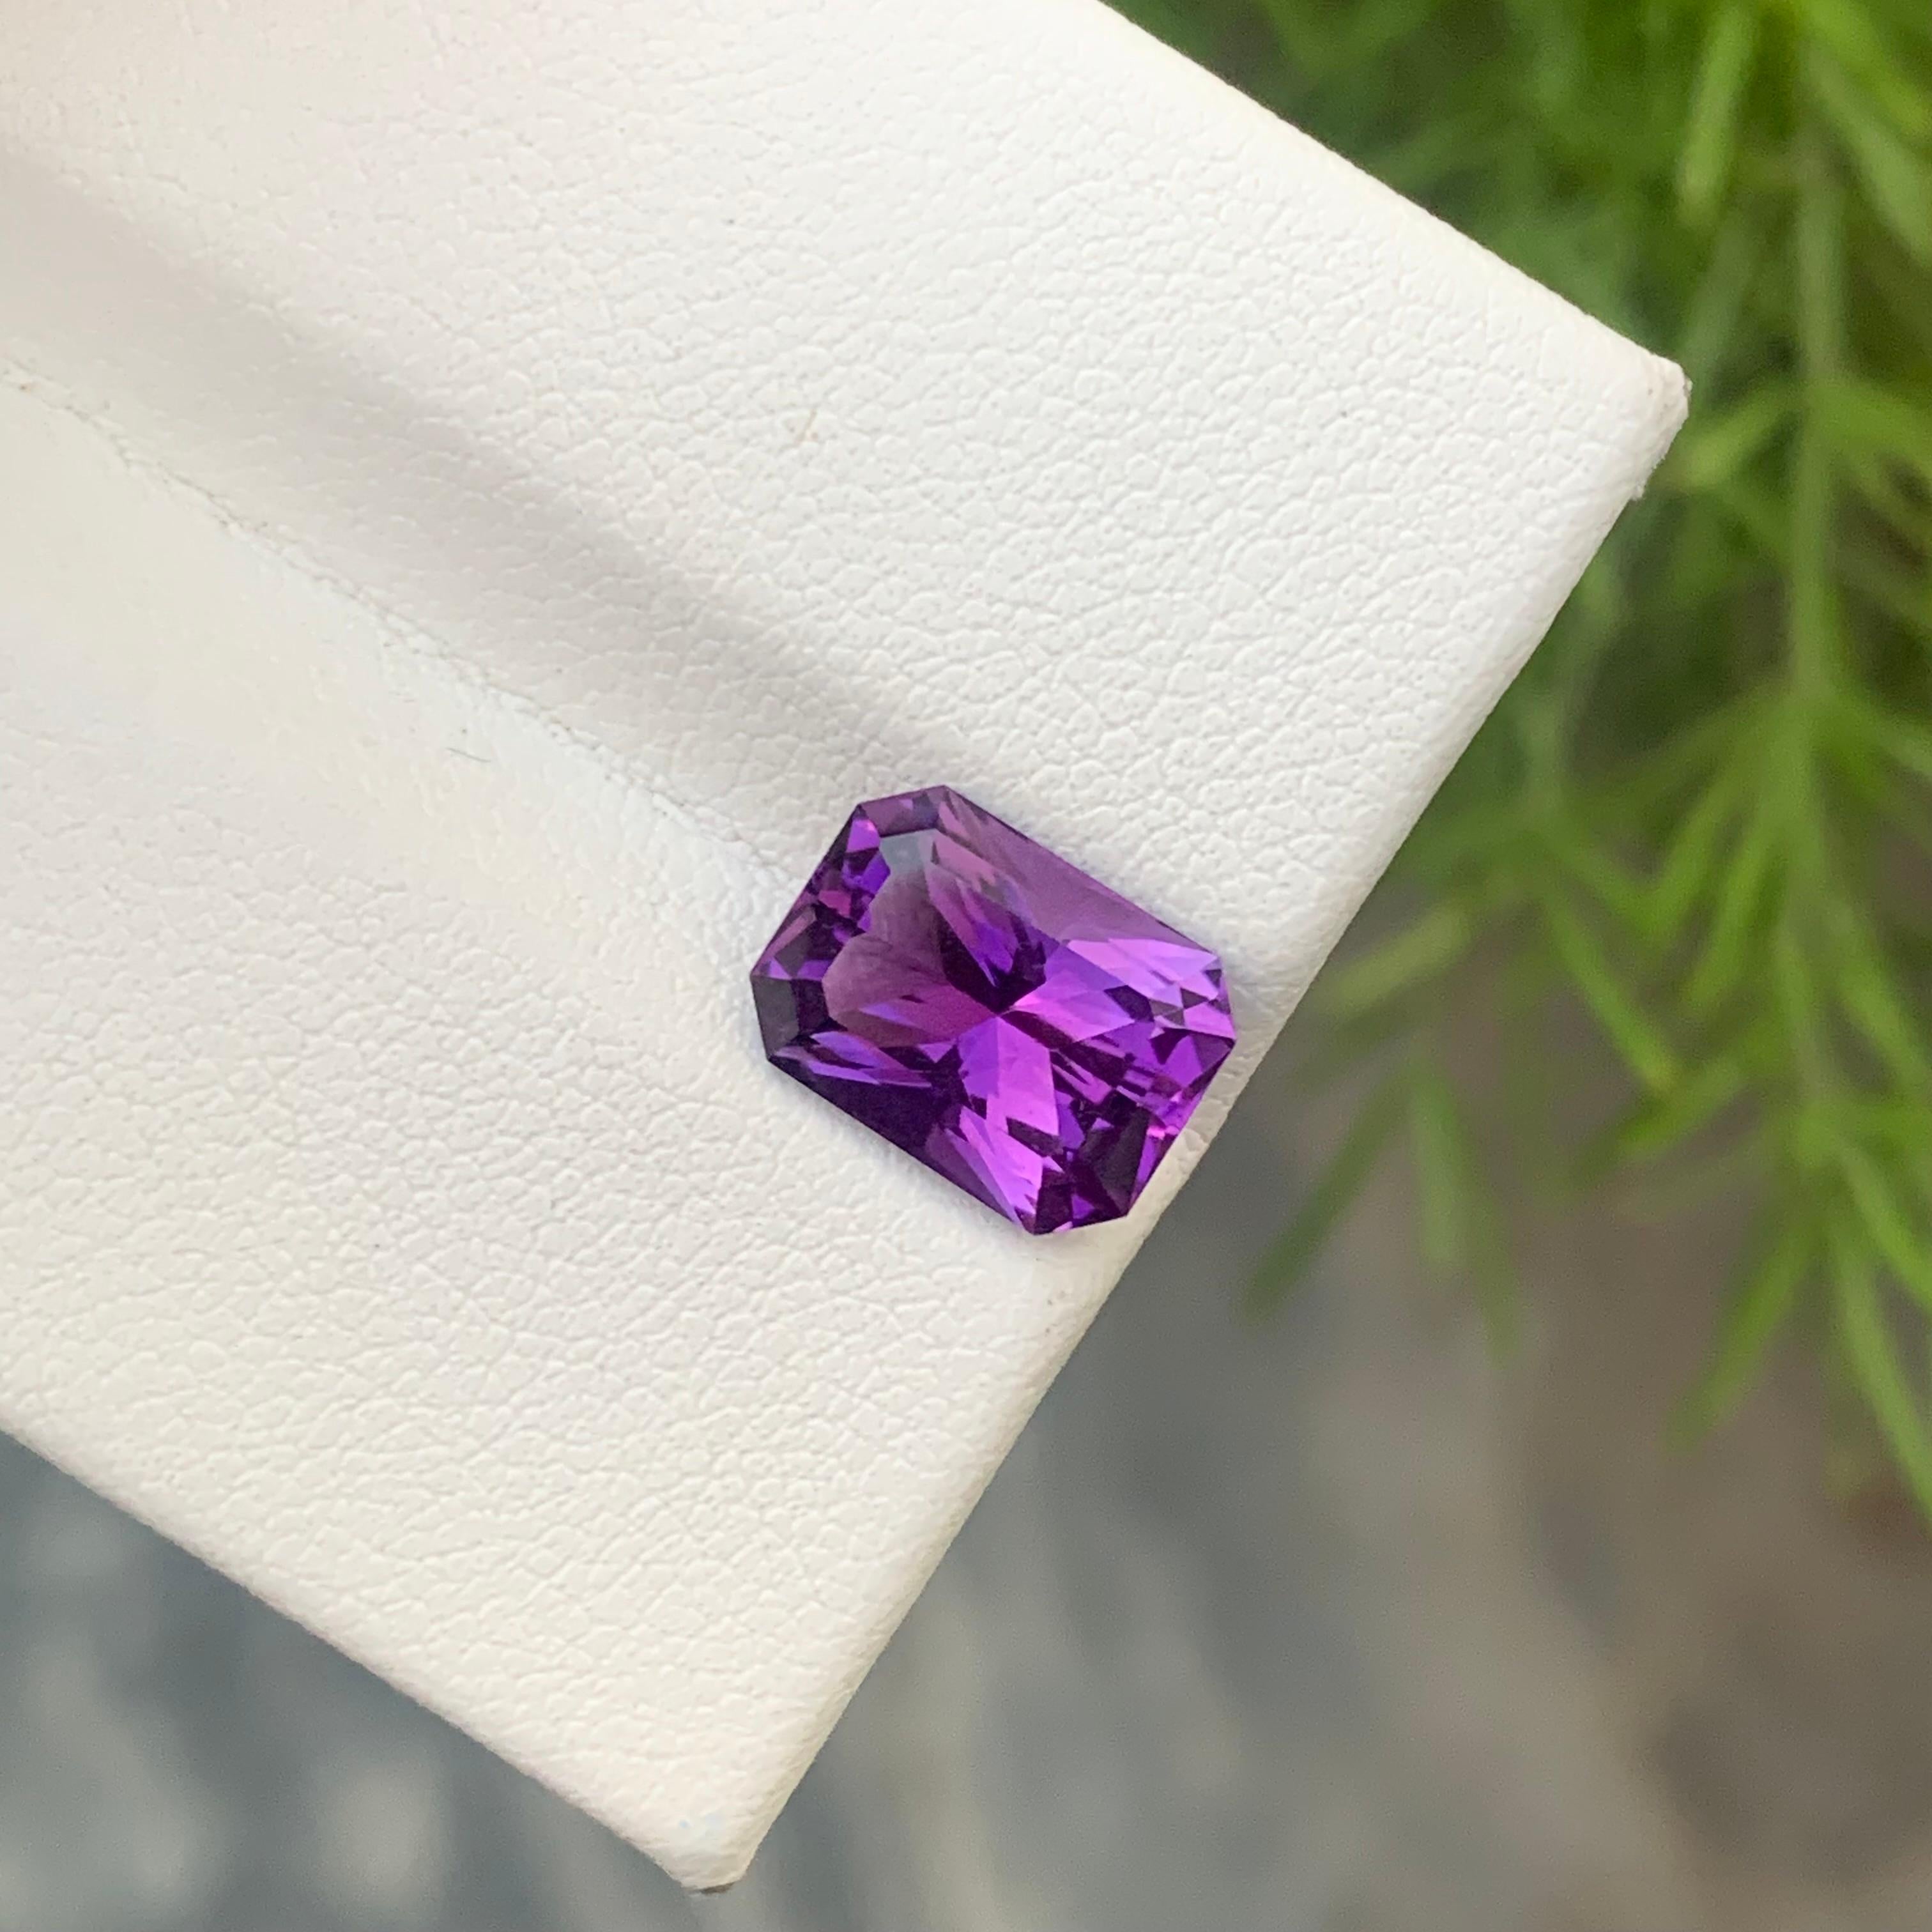 Gemstone Type : Amethyst
Weight : 2.95 Carats
Dimensions : 10.4x7.1x5.8 mm
Clarity : Eye Clean
Origin : Brazil
Color: Purple
Shape: Emerald 
Certificate: On Demand
Month: February

Purported amethyst powers for healing
enhancing the immune